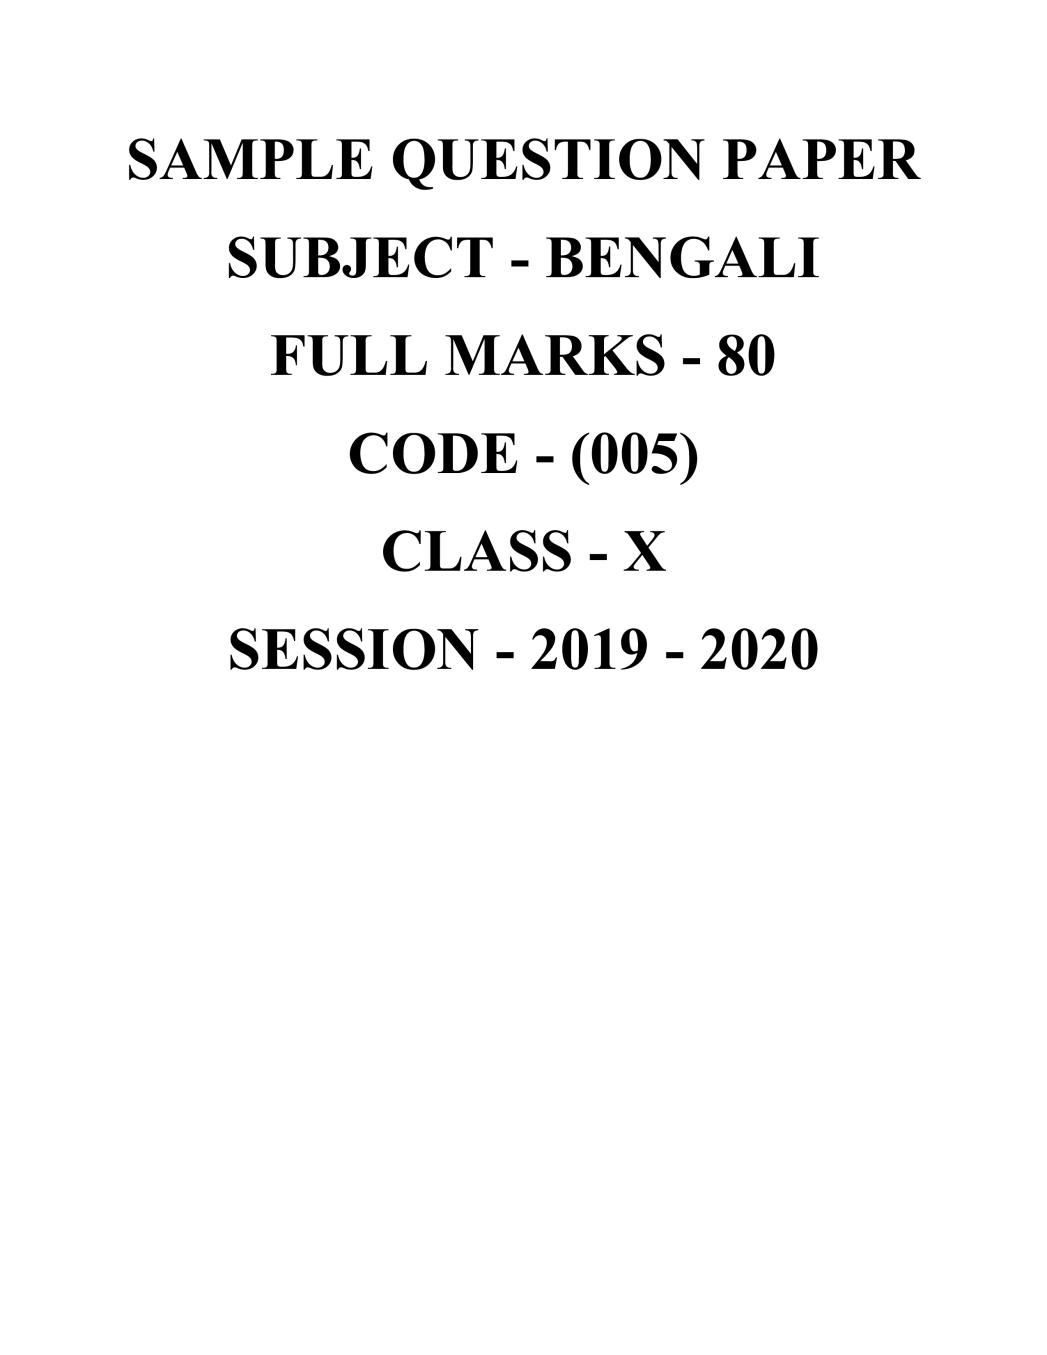 CBSE Class 10 Sample Paper 2020 for Bengali - Page 1